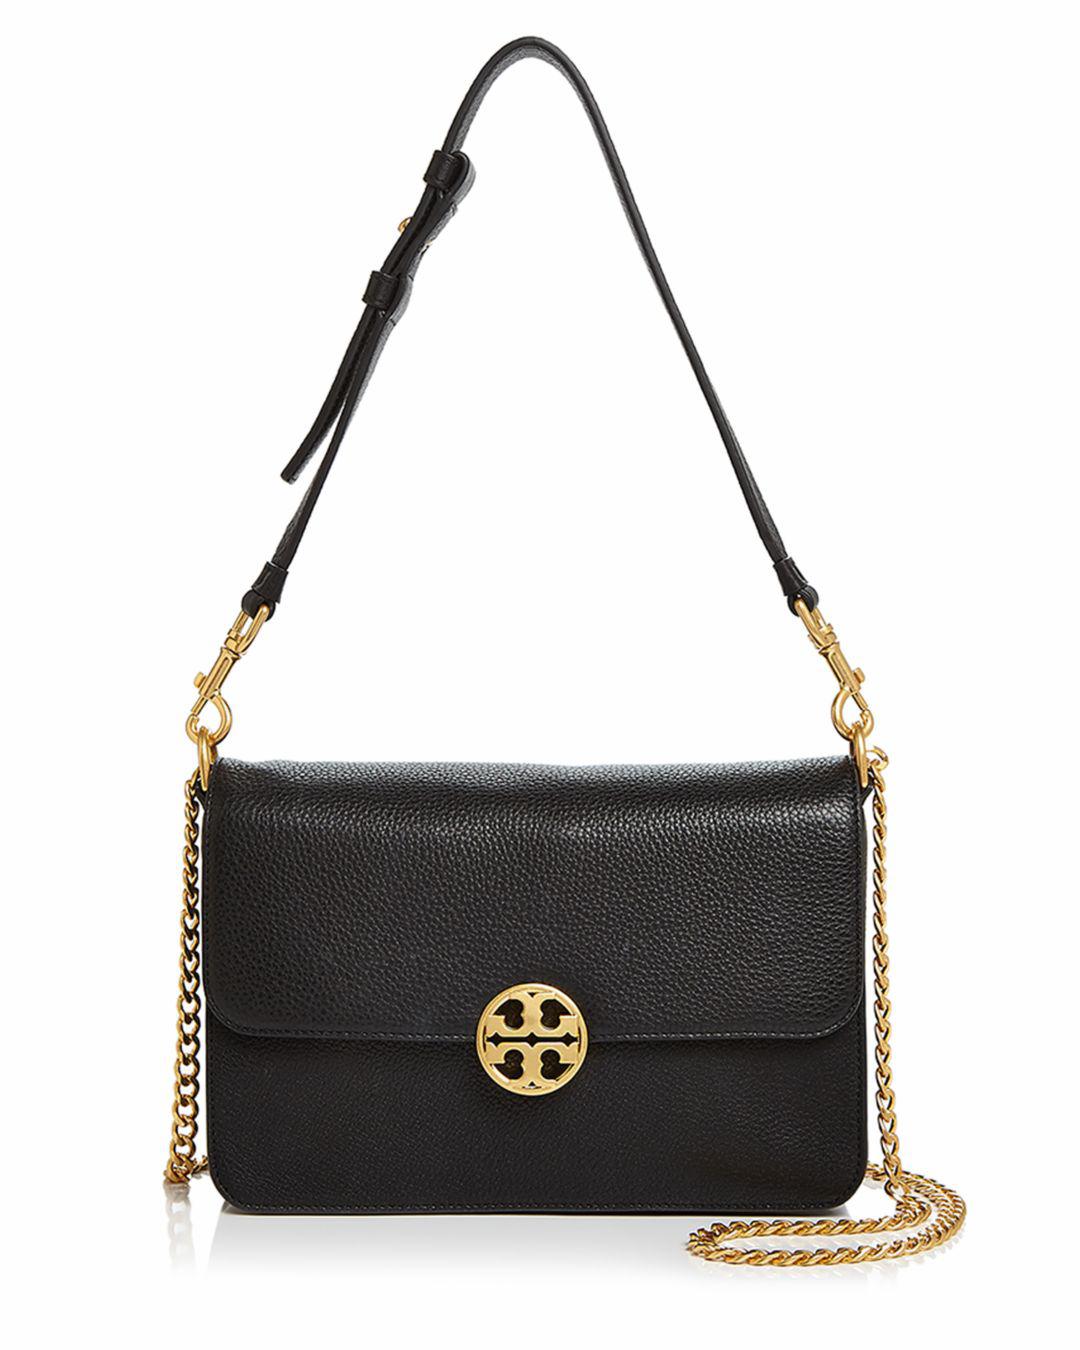 Tory Burch Chelsea Leather Convertible Shoulder Bag in Black/Gold ...